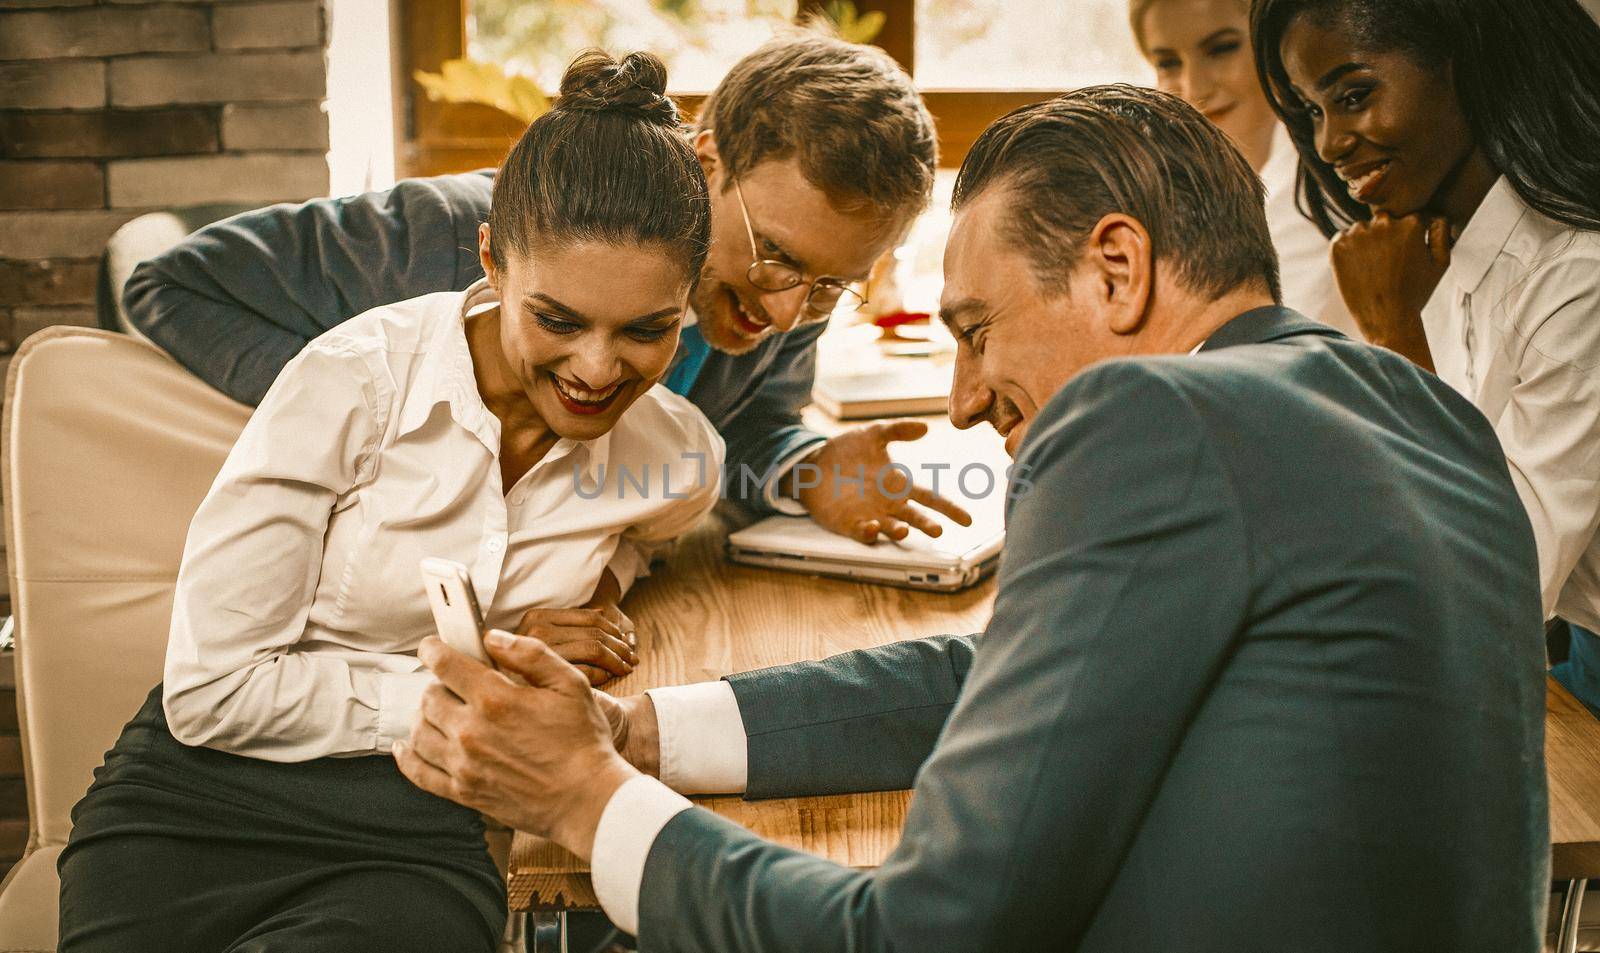 Business Team Of Employees Have Fun Sitting At Table And Using Phone, Charming Young Women In White Shirts And Men Toothy Smiling While Looking At Their Colleague's Phone In Foreground, Toned Image